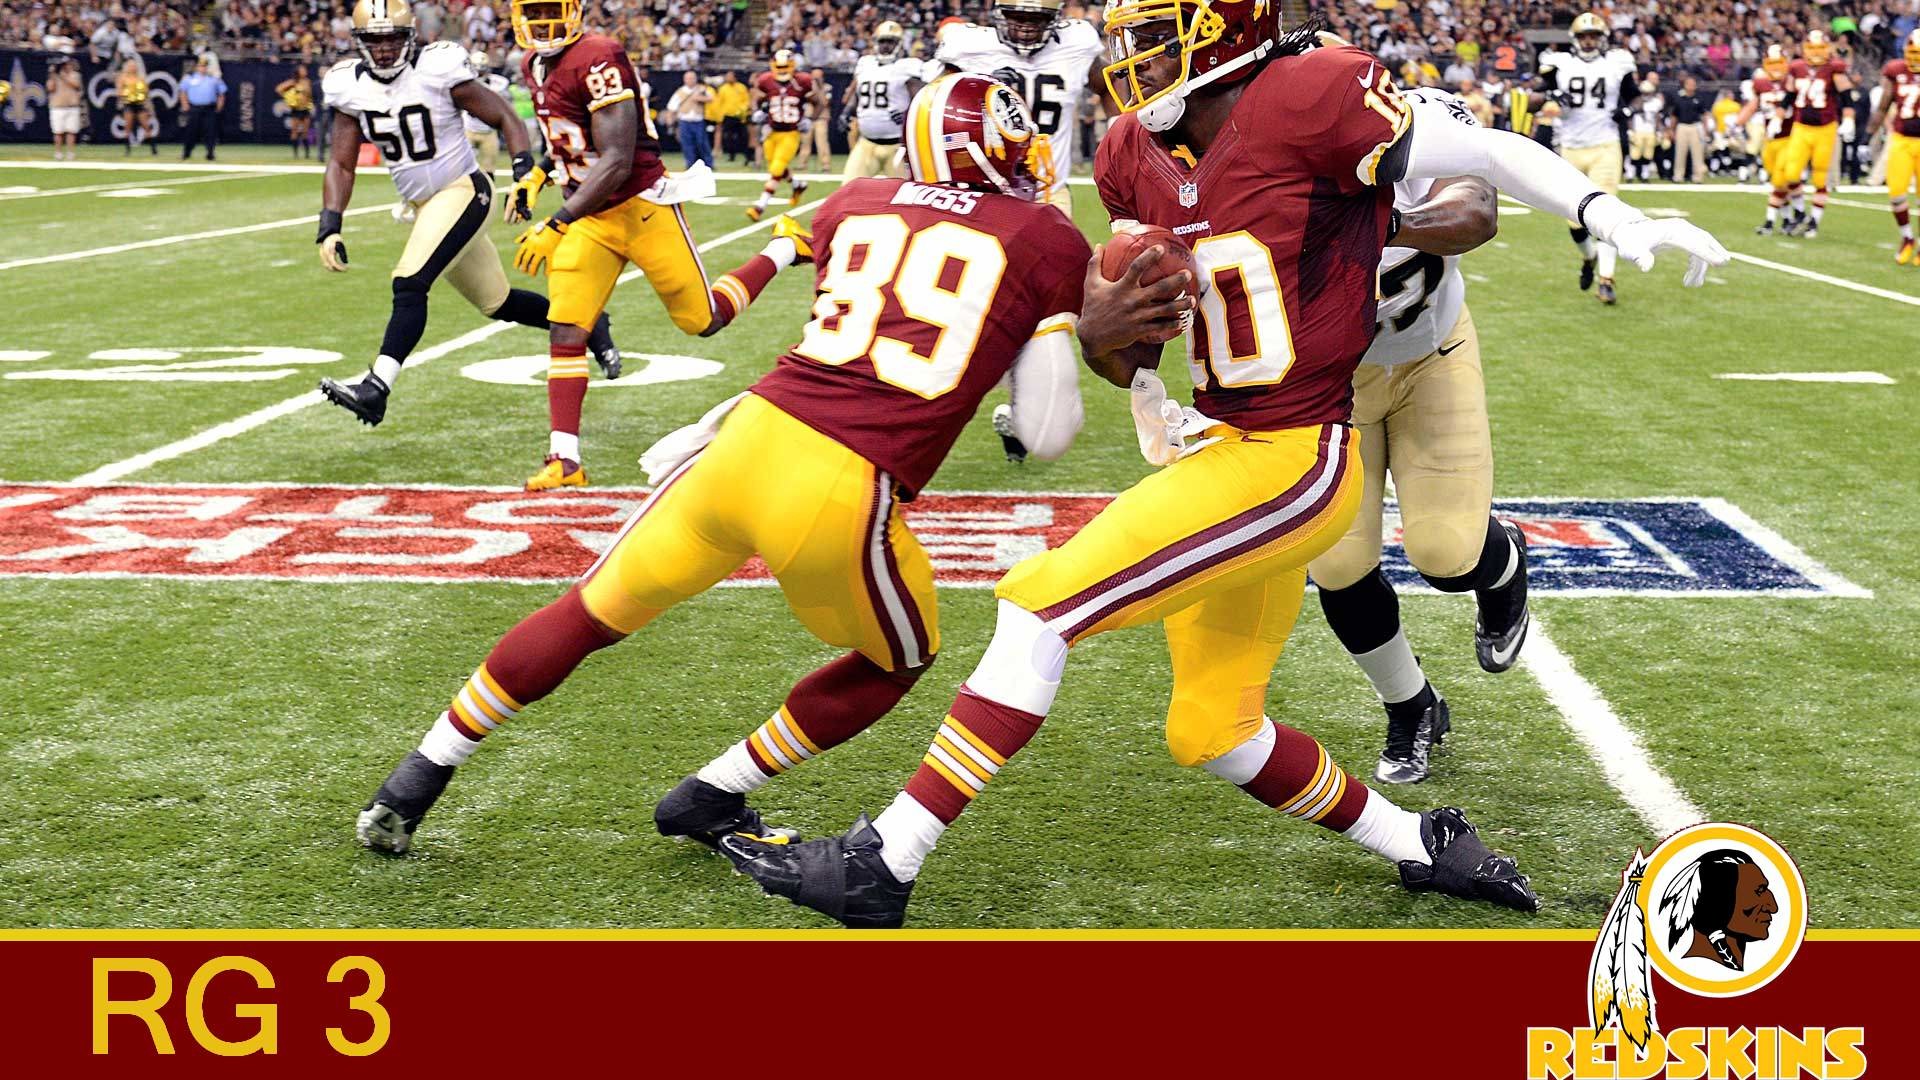 1920x1080 Redskins Wallpapers For iPad. Download